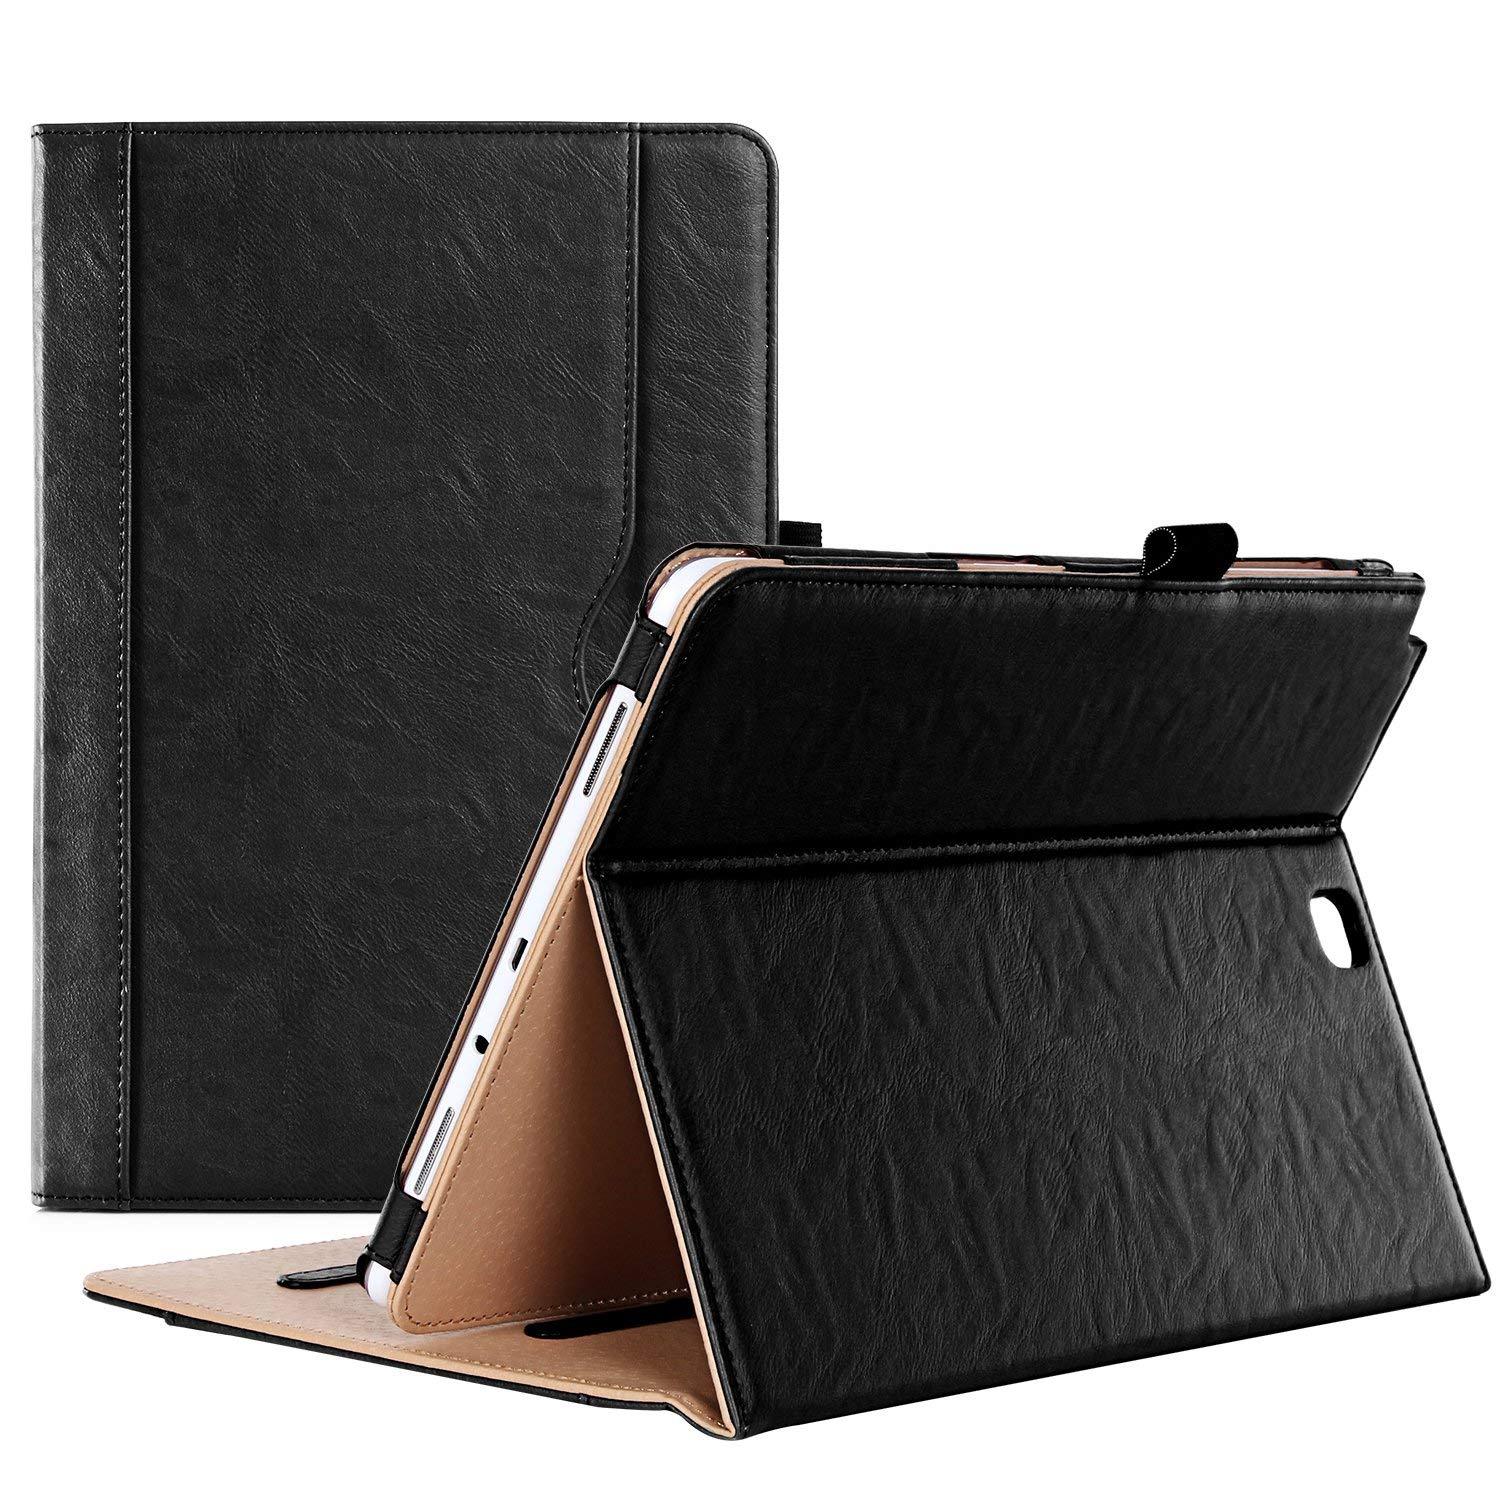 Samsung Galaxy Tab A 9.7 Case – Slim Fit Premium PU Leather Case Cover for  Galaxy Tab A 9.7-Inch Tablet SM-T550 (Not for SM-P550),One Horse